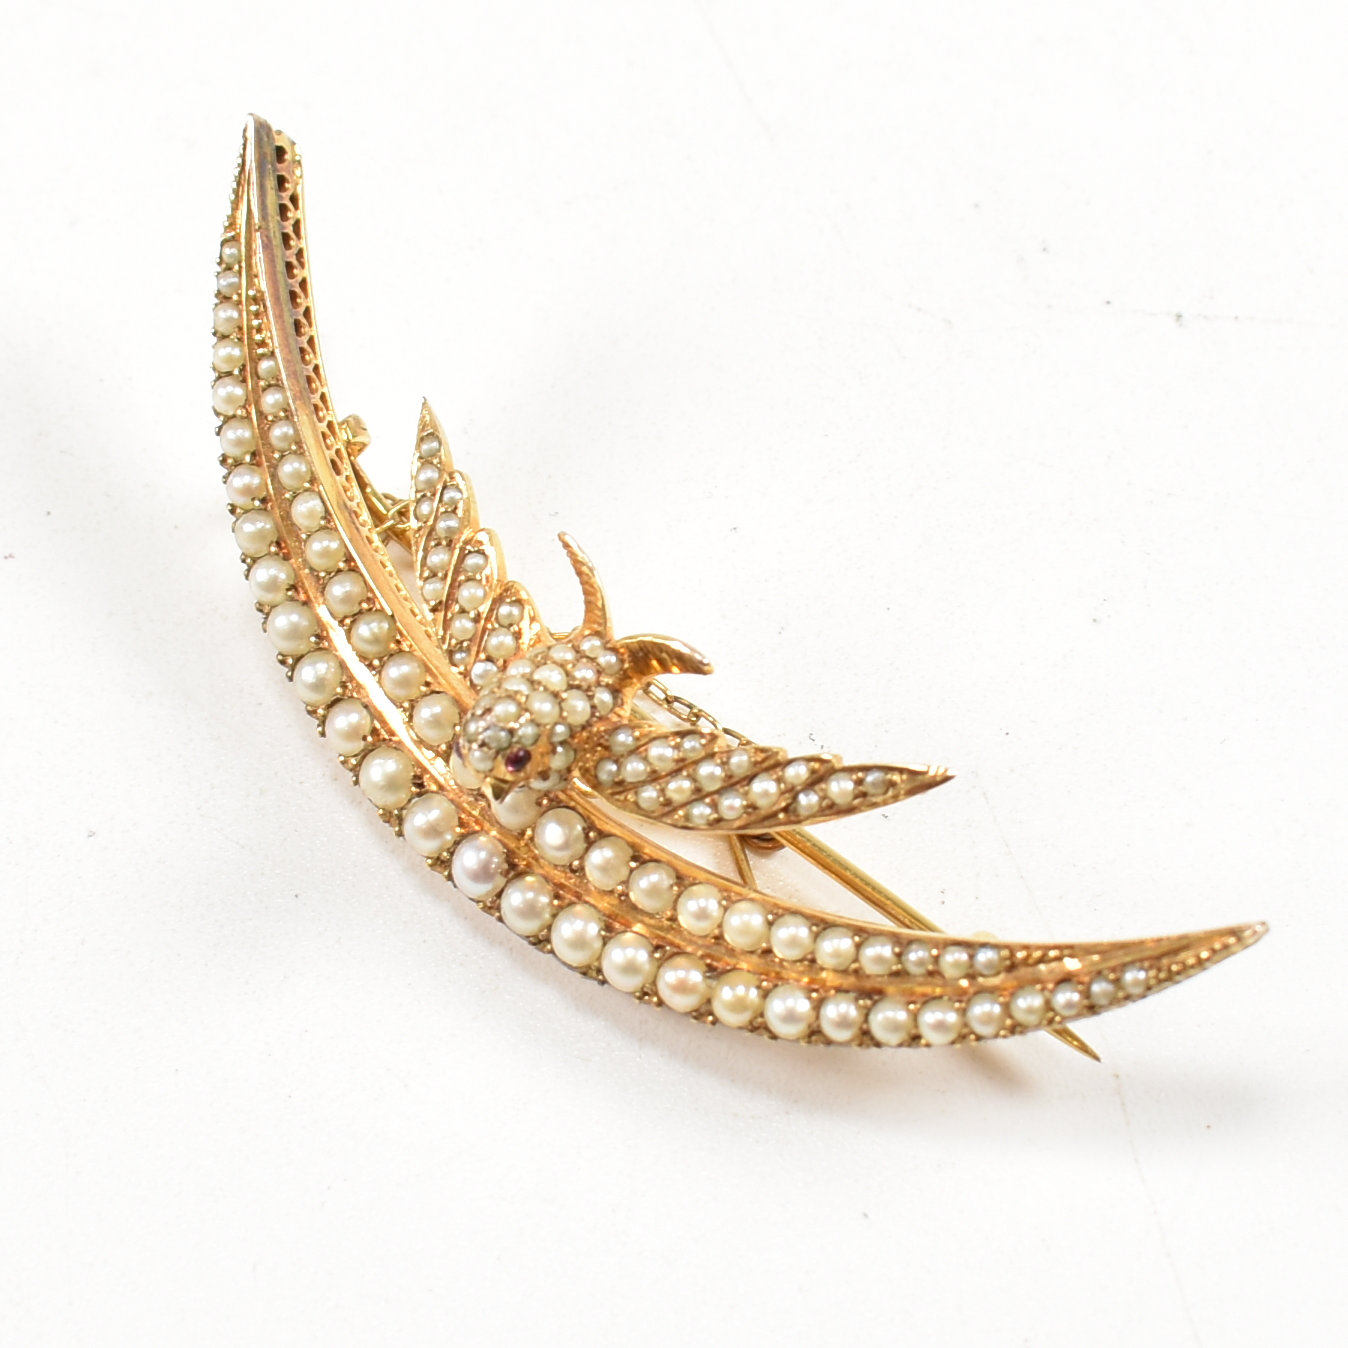 19TH CENTURY 15CT GOLD SWALLOW & CRESCENT BROOCH PIN - Image 2 of 8